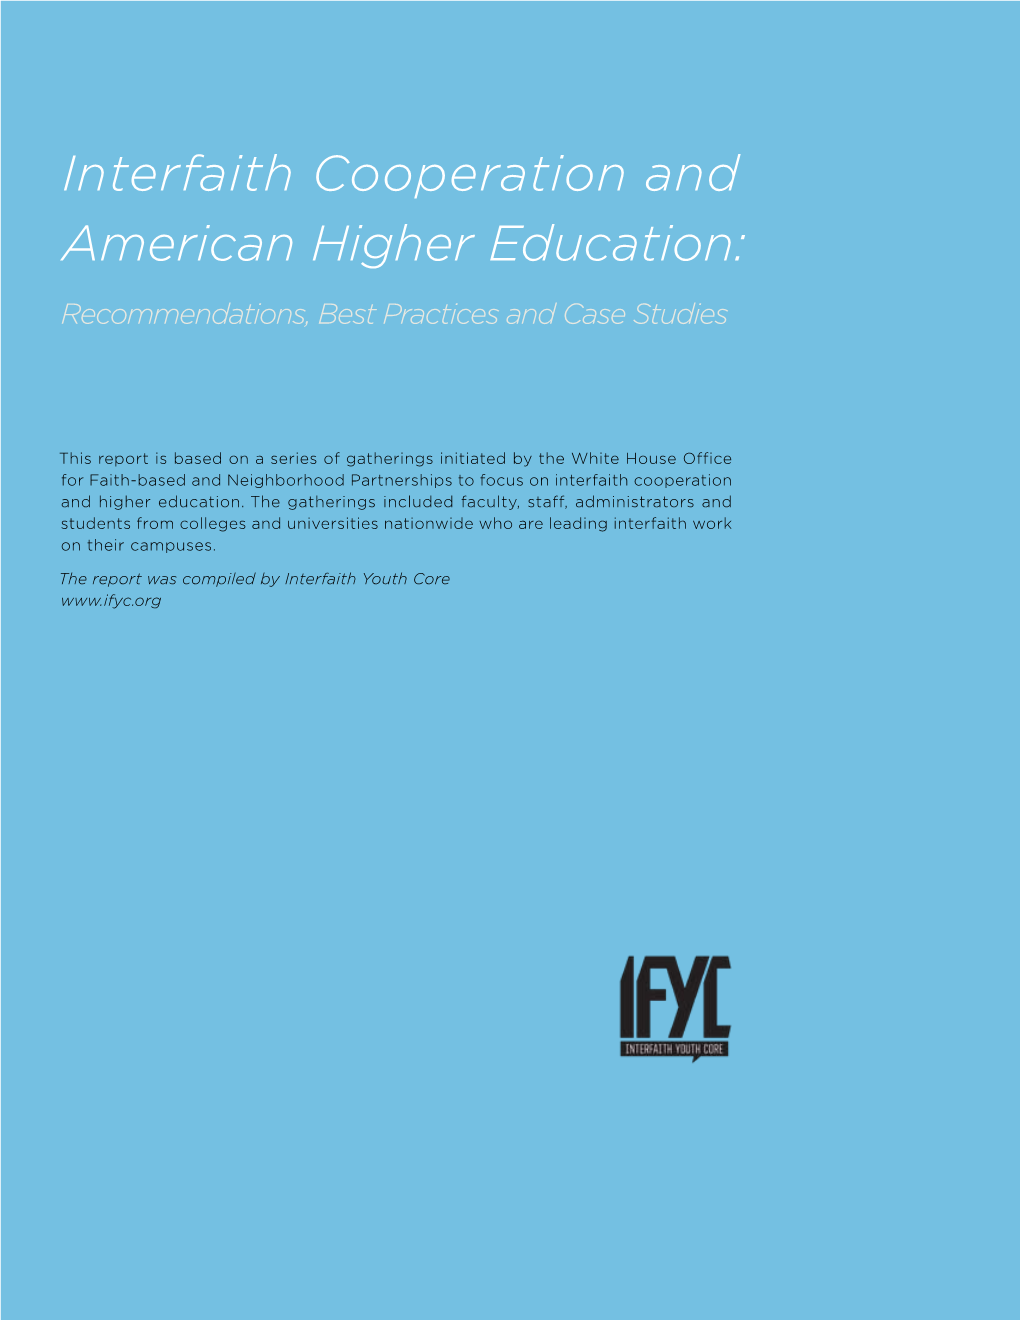 Interfaith Cooperation and American Higher Education